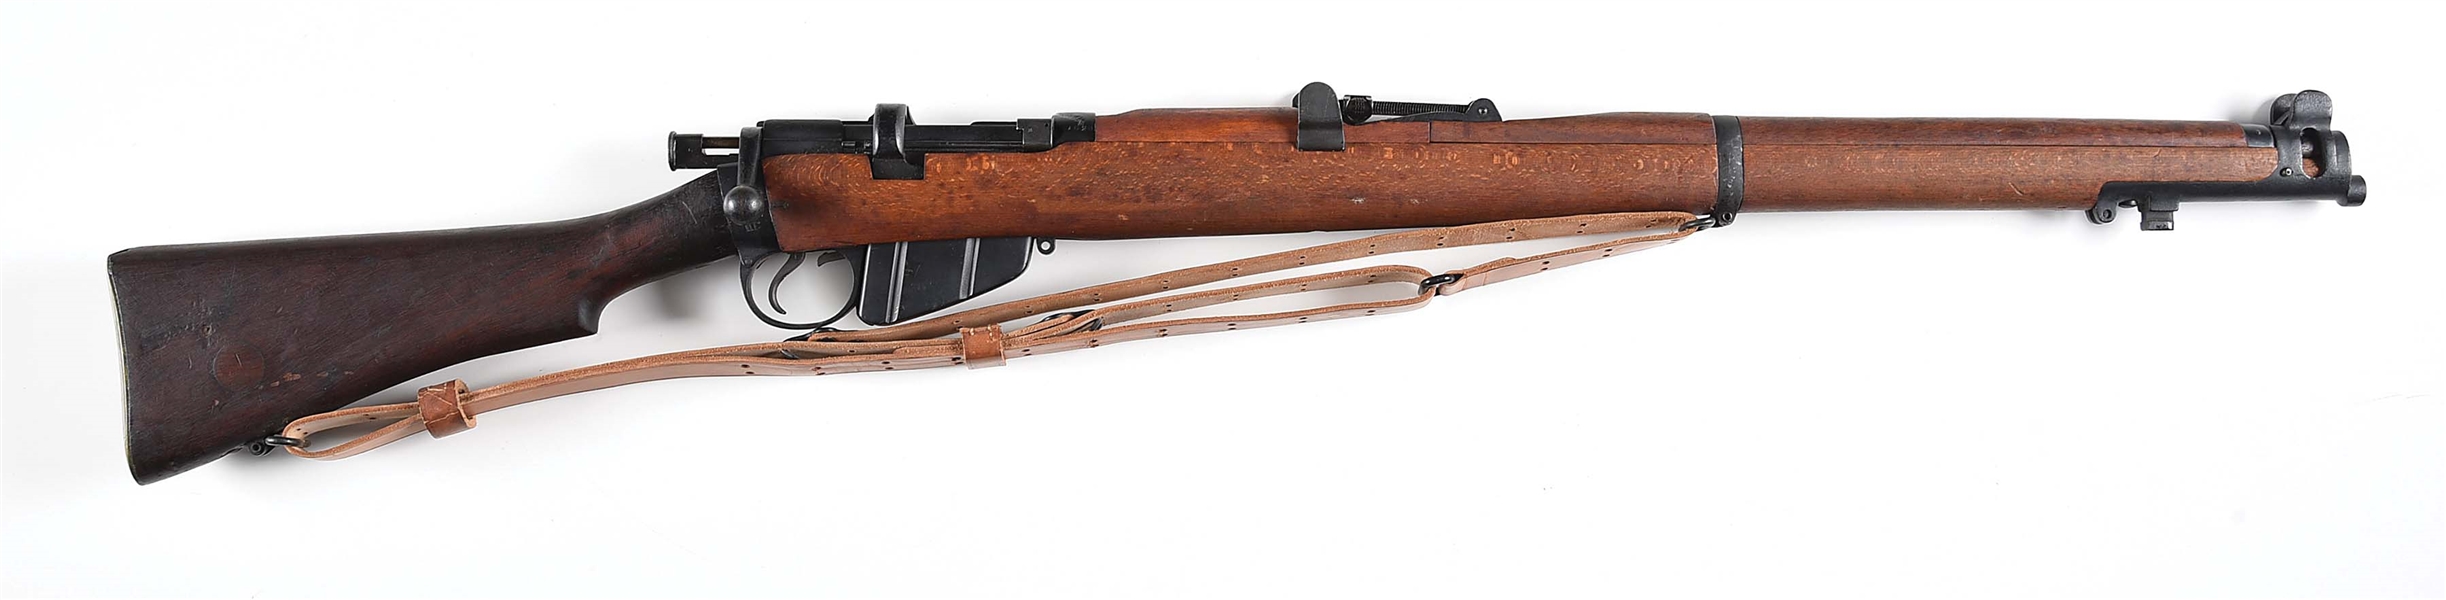 (C)1916 DATED BRITISH NO.1 MK III ENFIELD BOLT ACTION RIFLE.